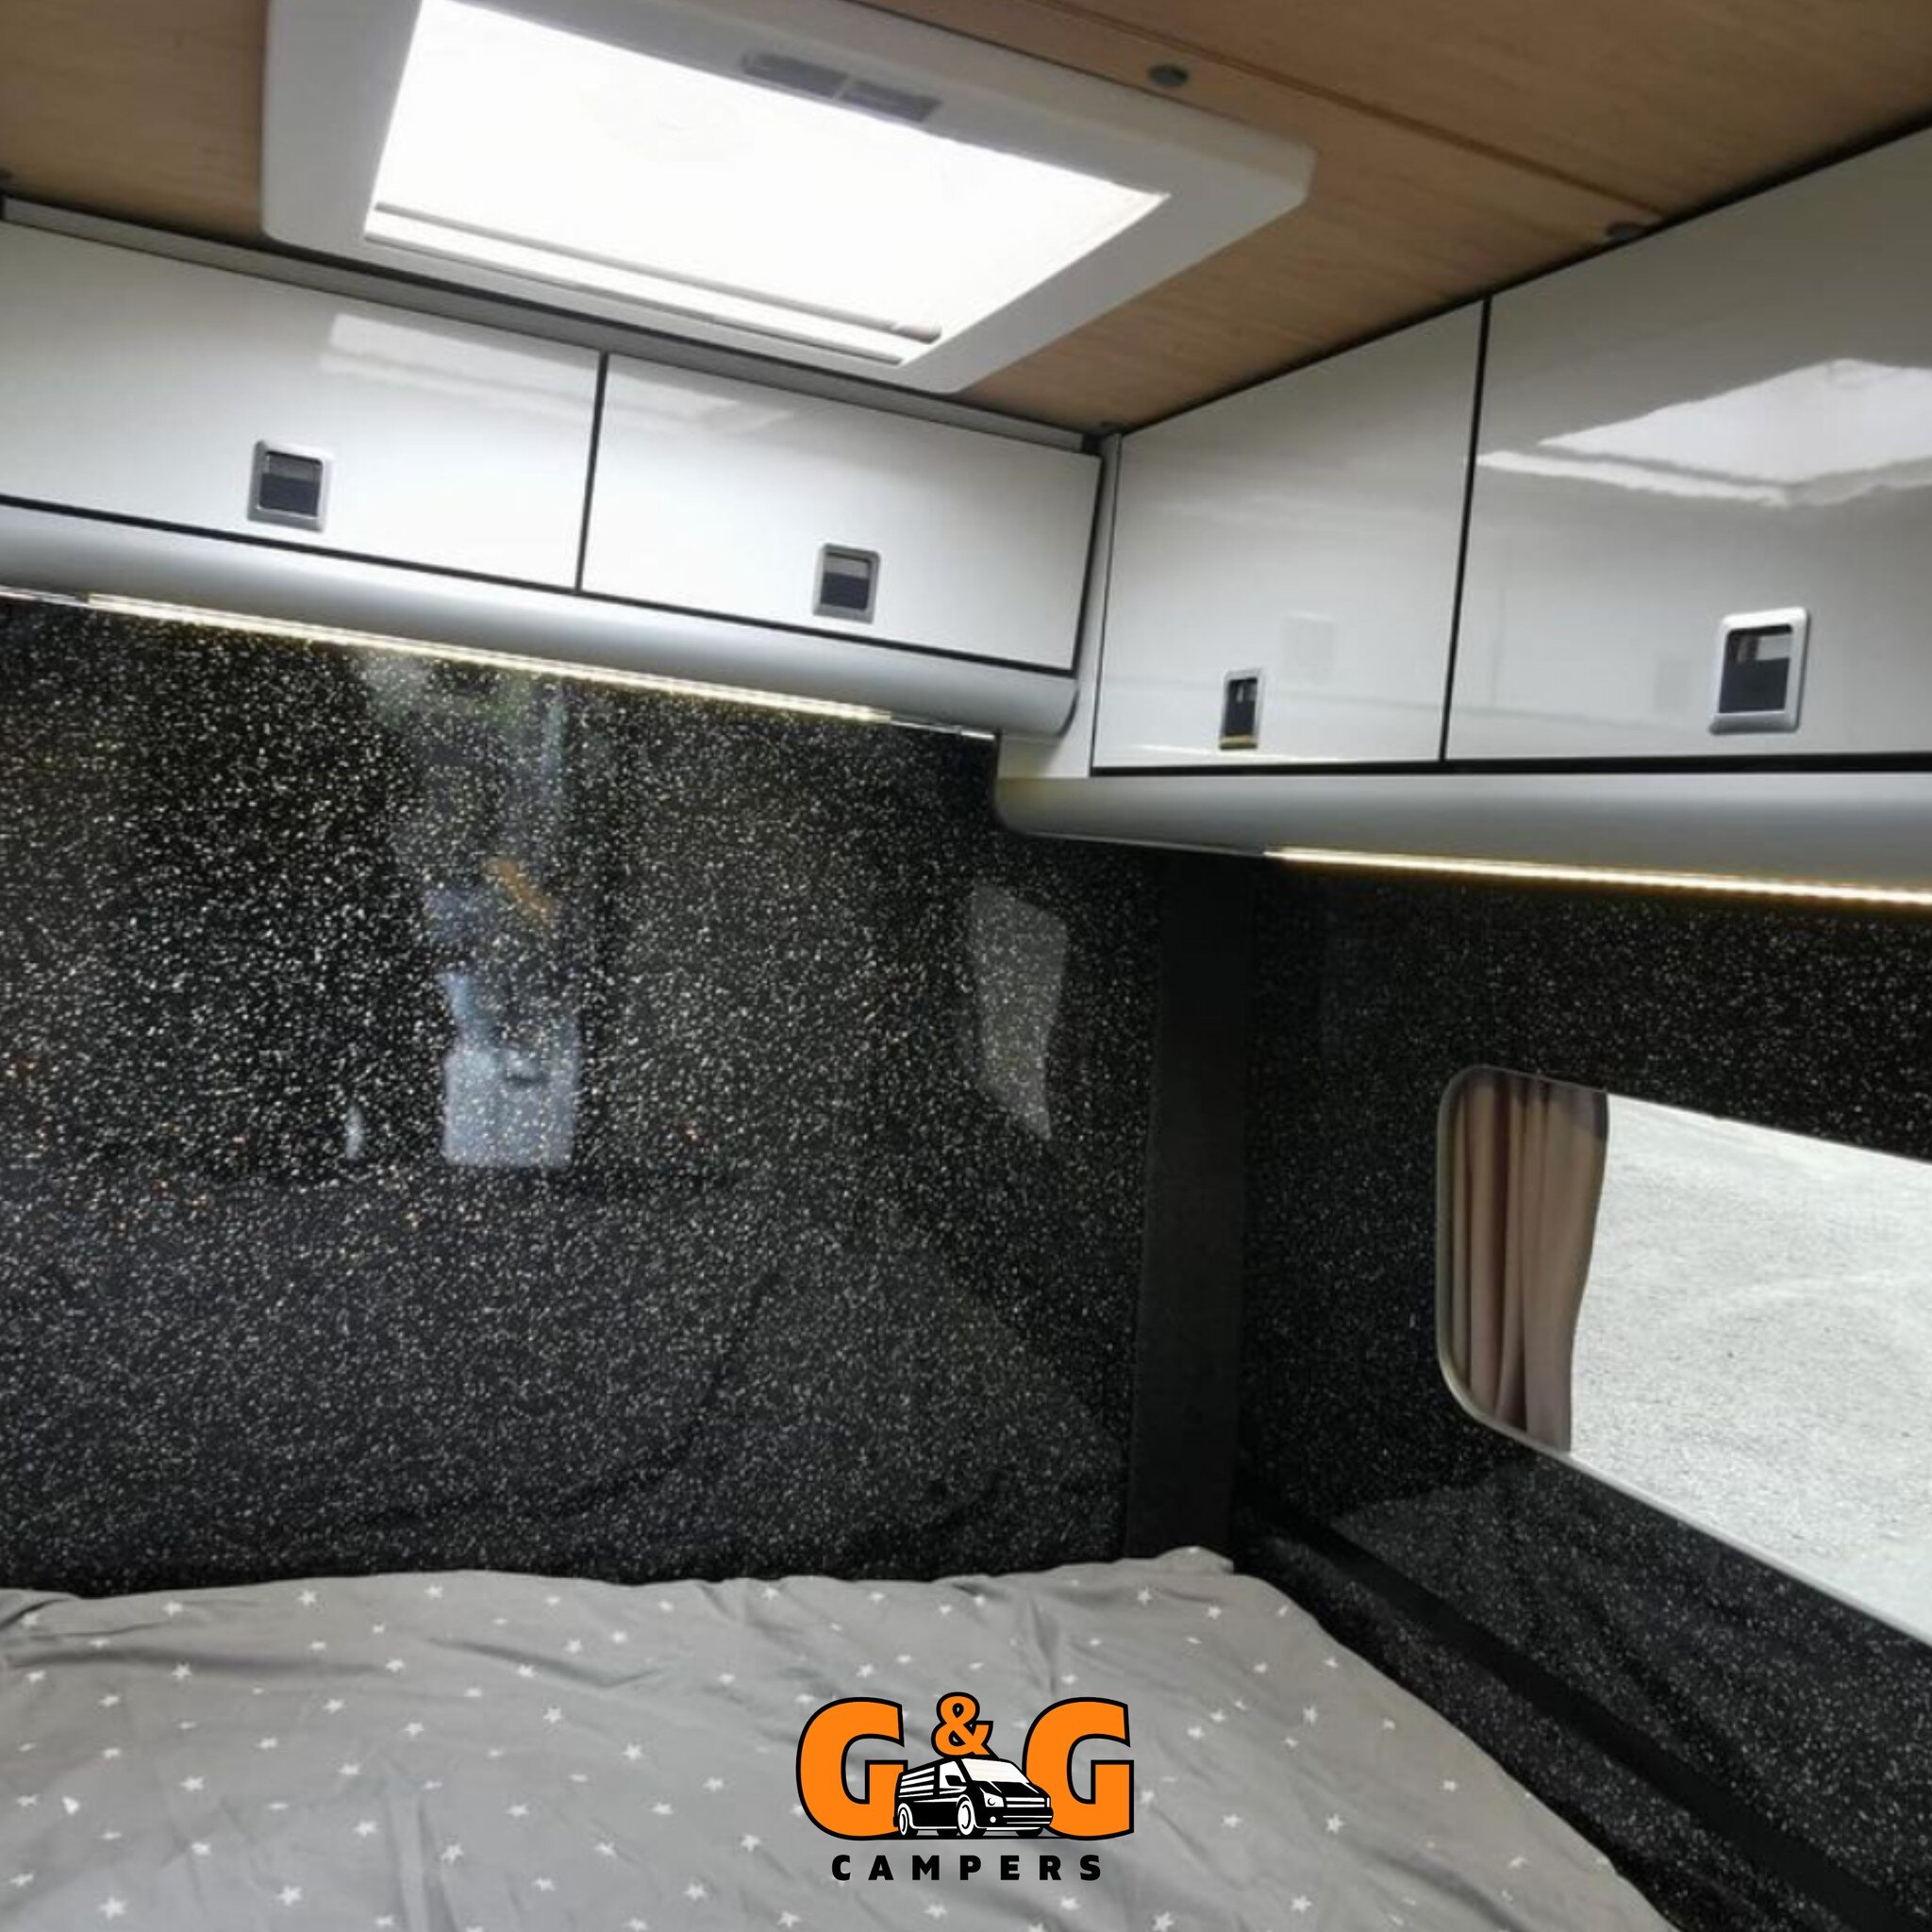 Are you looking for additional overhead storage for your motorhome? We can help with just that! 🙌🏼

All of our client projects can vary, and they aren't always full conversions. If you have additions that you'd like to make, but you're not sure on 